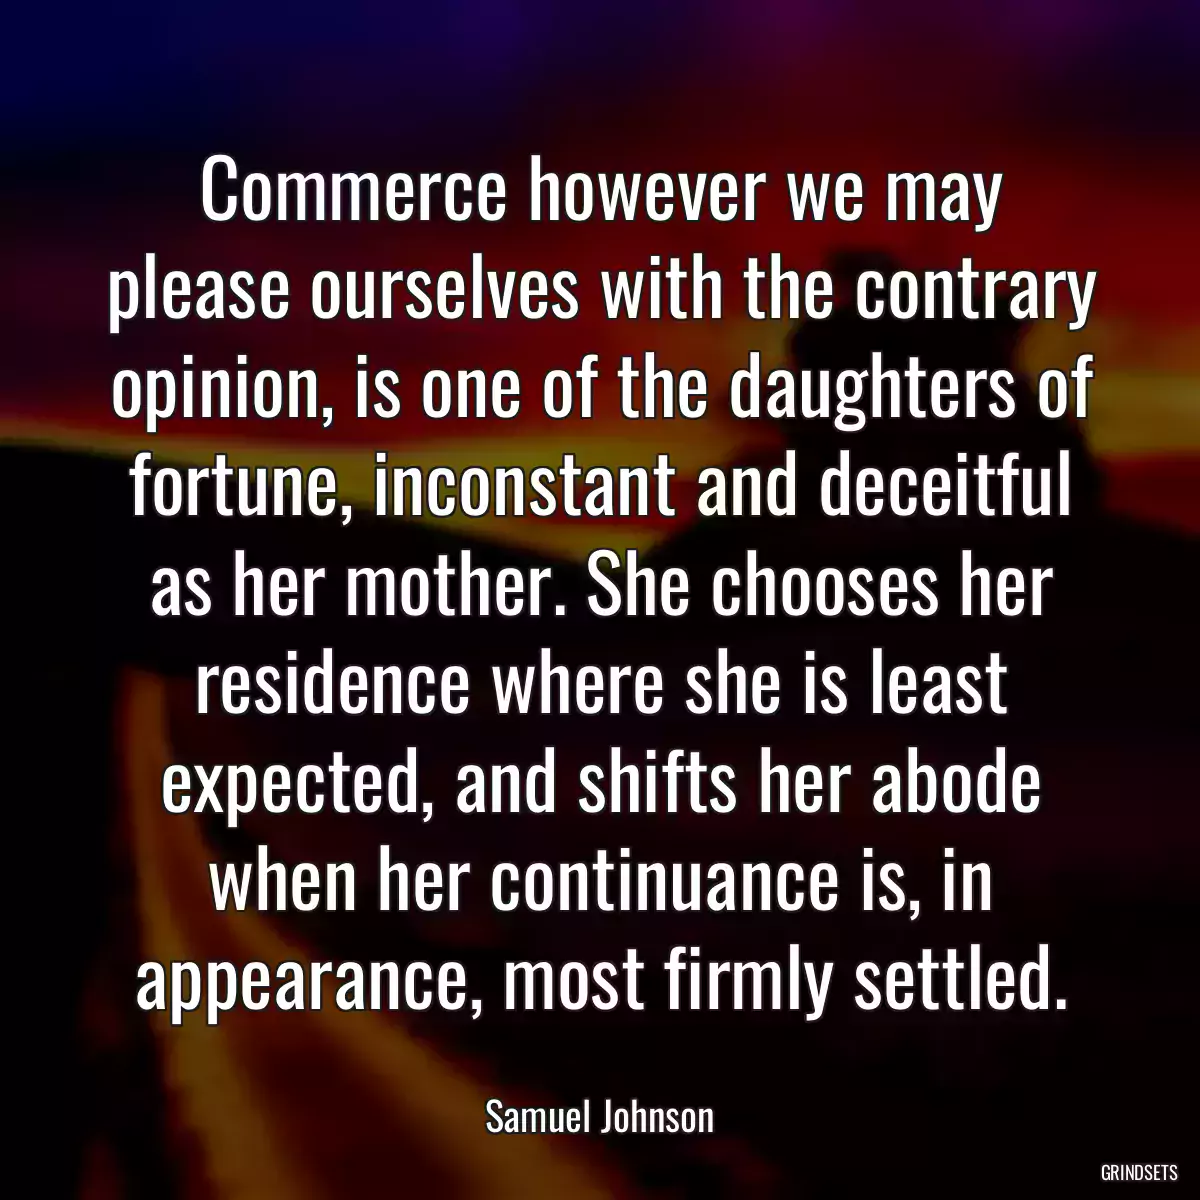 Commerce however we may please ourselves with the contrary opinion, is one of the daughters of fortune, inconstant and deceitful as her mother. She chooses her residence where she is least expected, and shifts her abode when her continuance is, in appearance, most firmly settled.